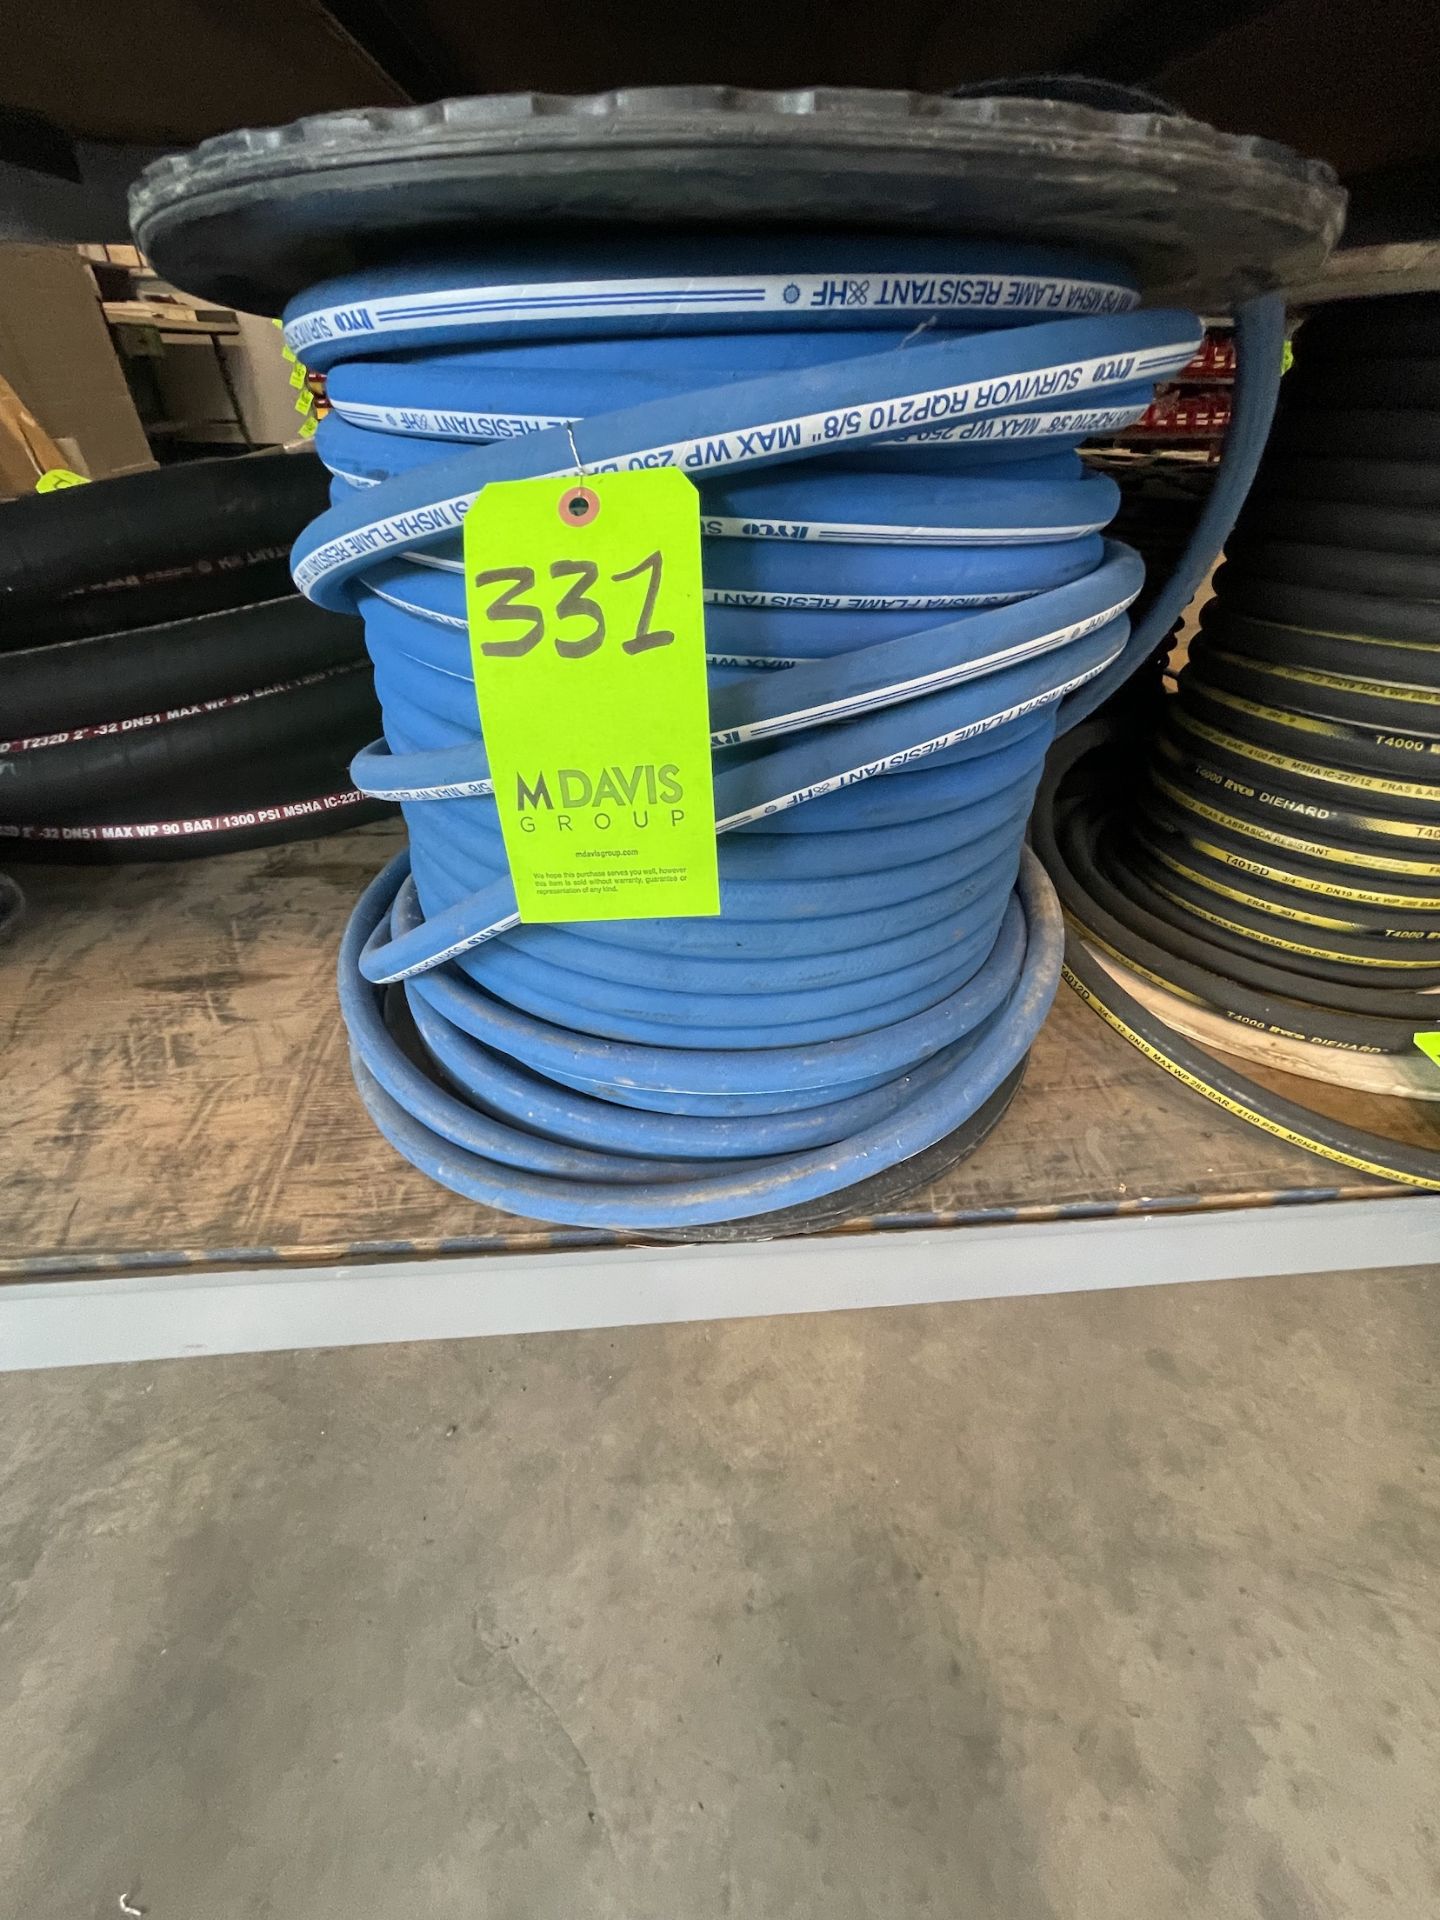 RYCO SURVIVOR RQP HYDRAULIC HOSE 5/8" 3600psi (ALL PURCHASES MUST BE PAID FOR AND REMOVED BY 5/4/22)